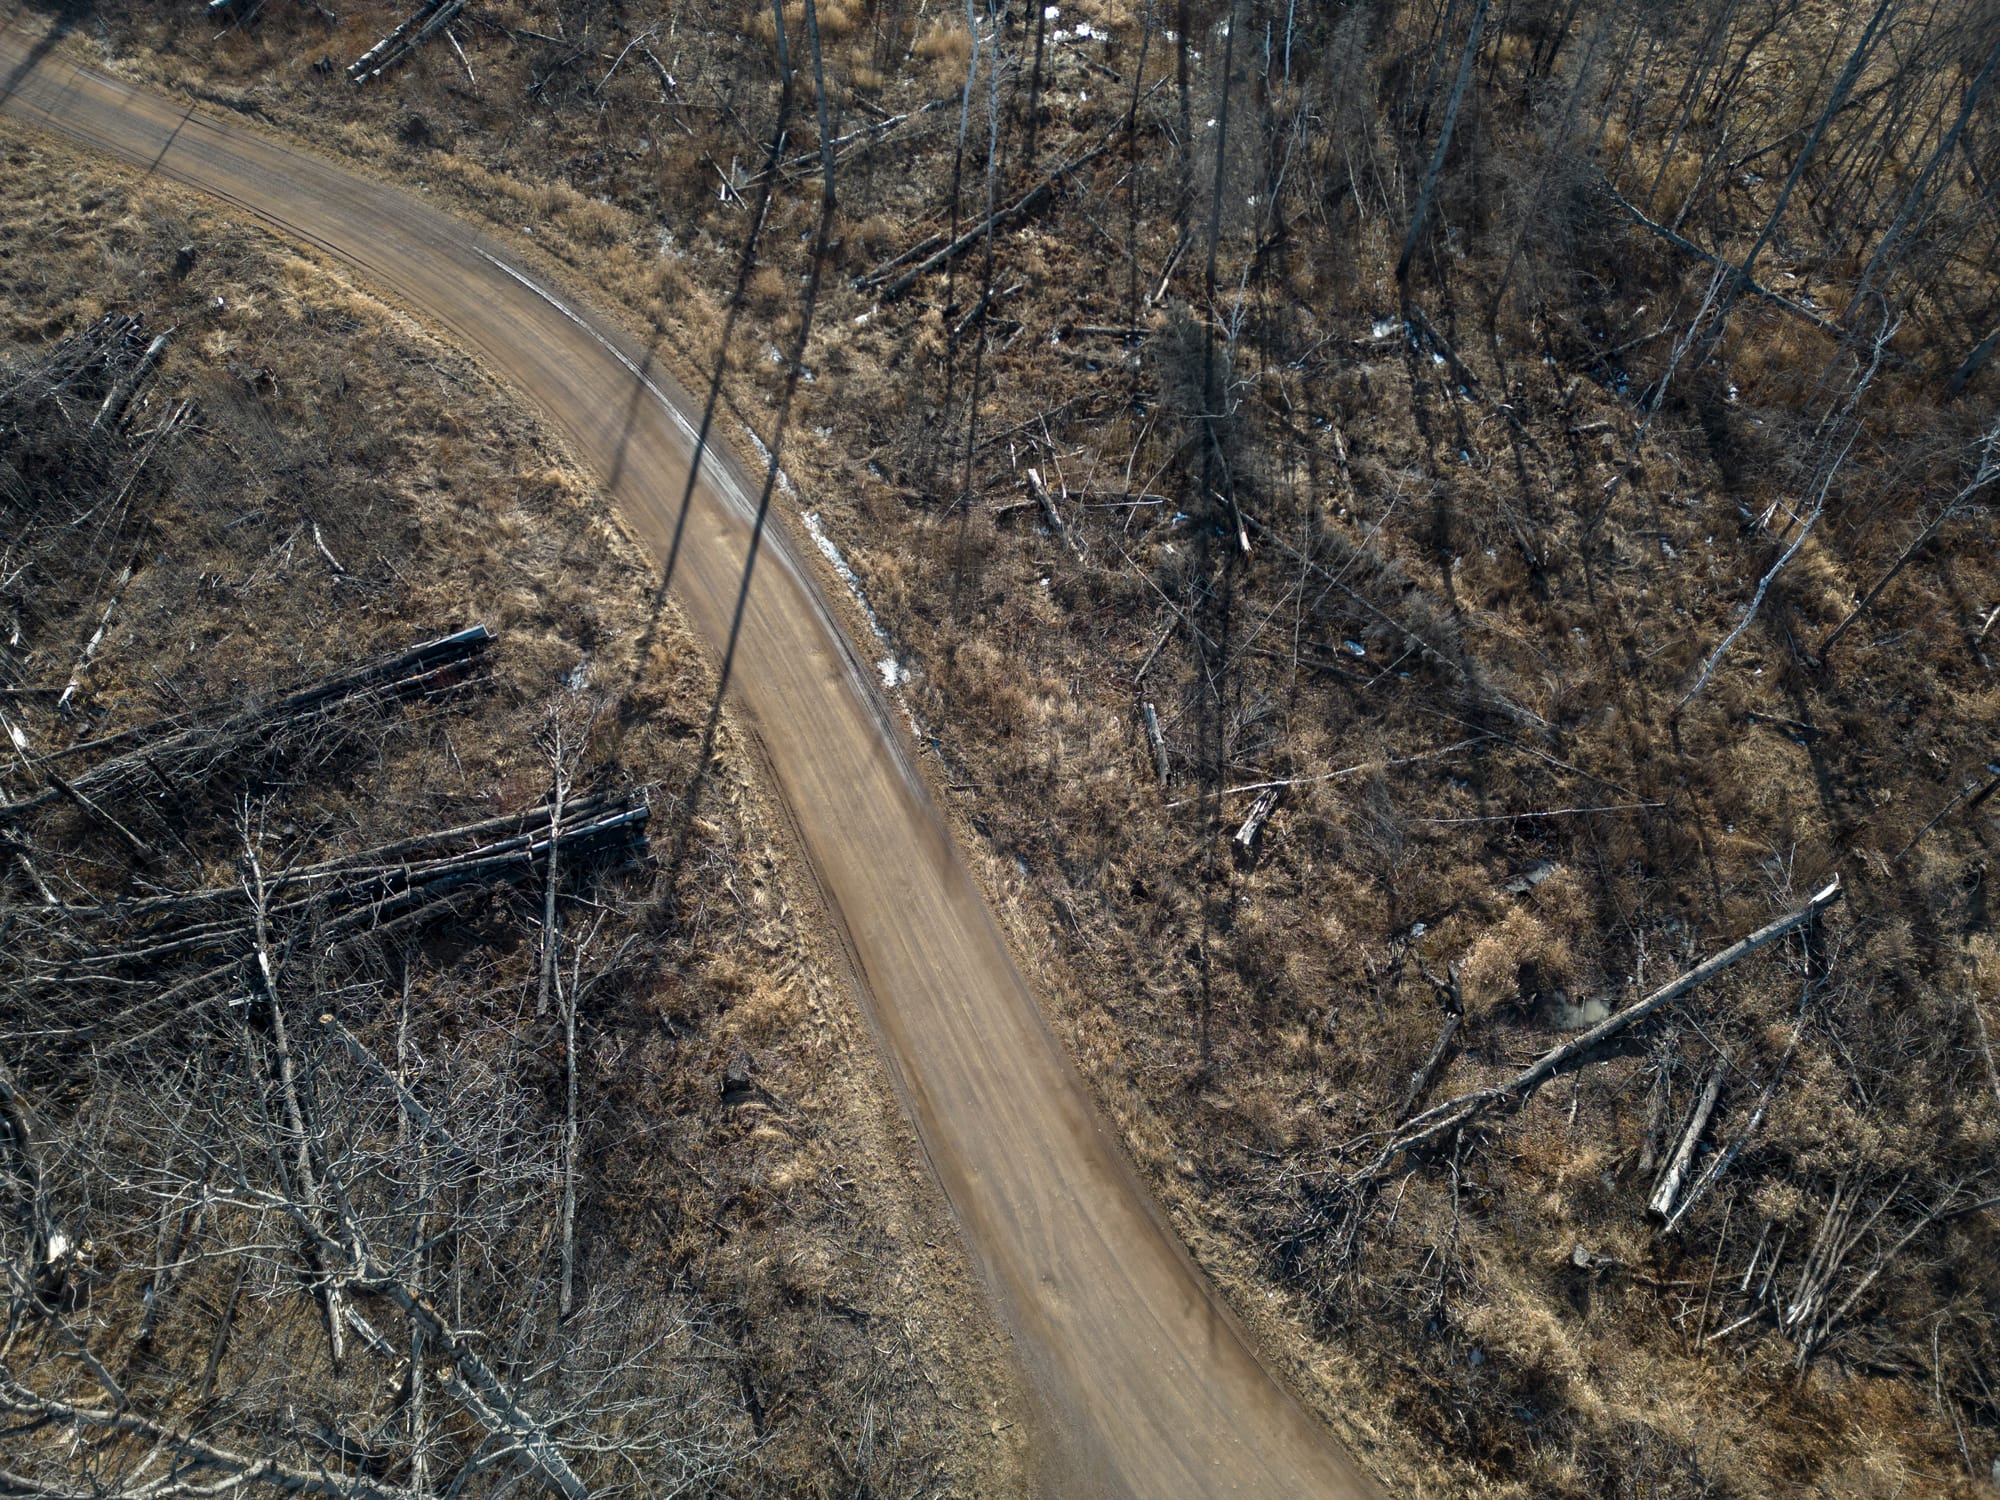 Fuel to the fire: How climate change makes wildfire season worse